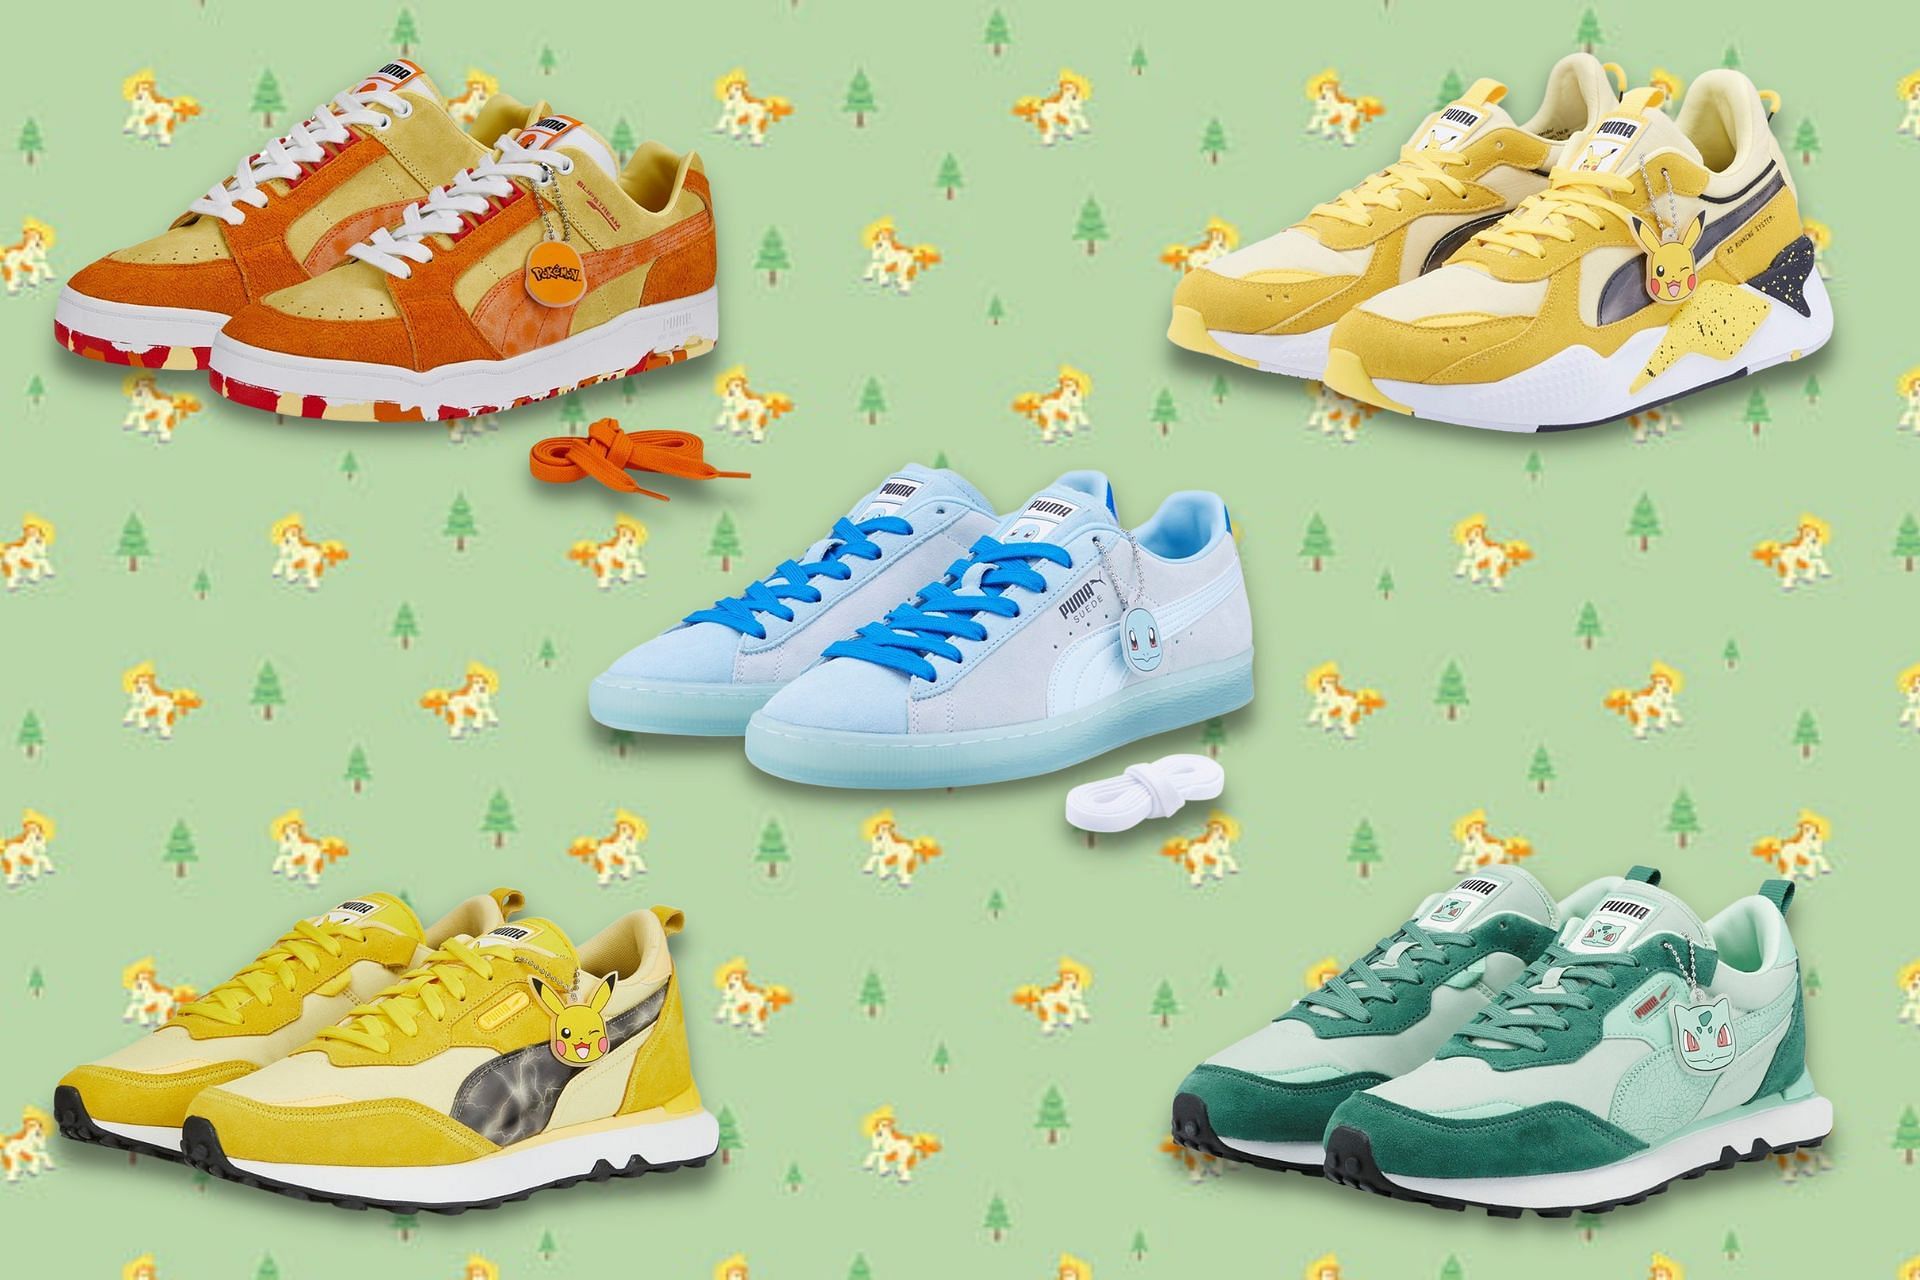 Upcoming Puma x Pok&eacute;mon footwear collection featuring Four iconic - Bulbasaur, Squirtle, Charmander, and Pikachu - characters (Image via Sportskeeda)